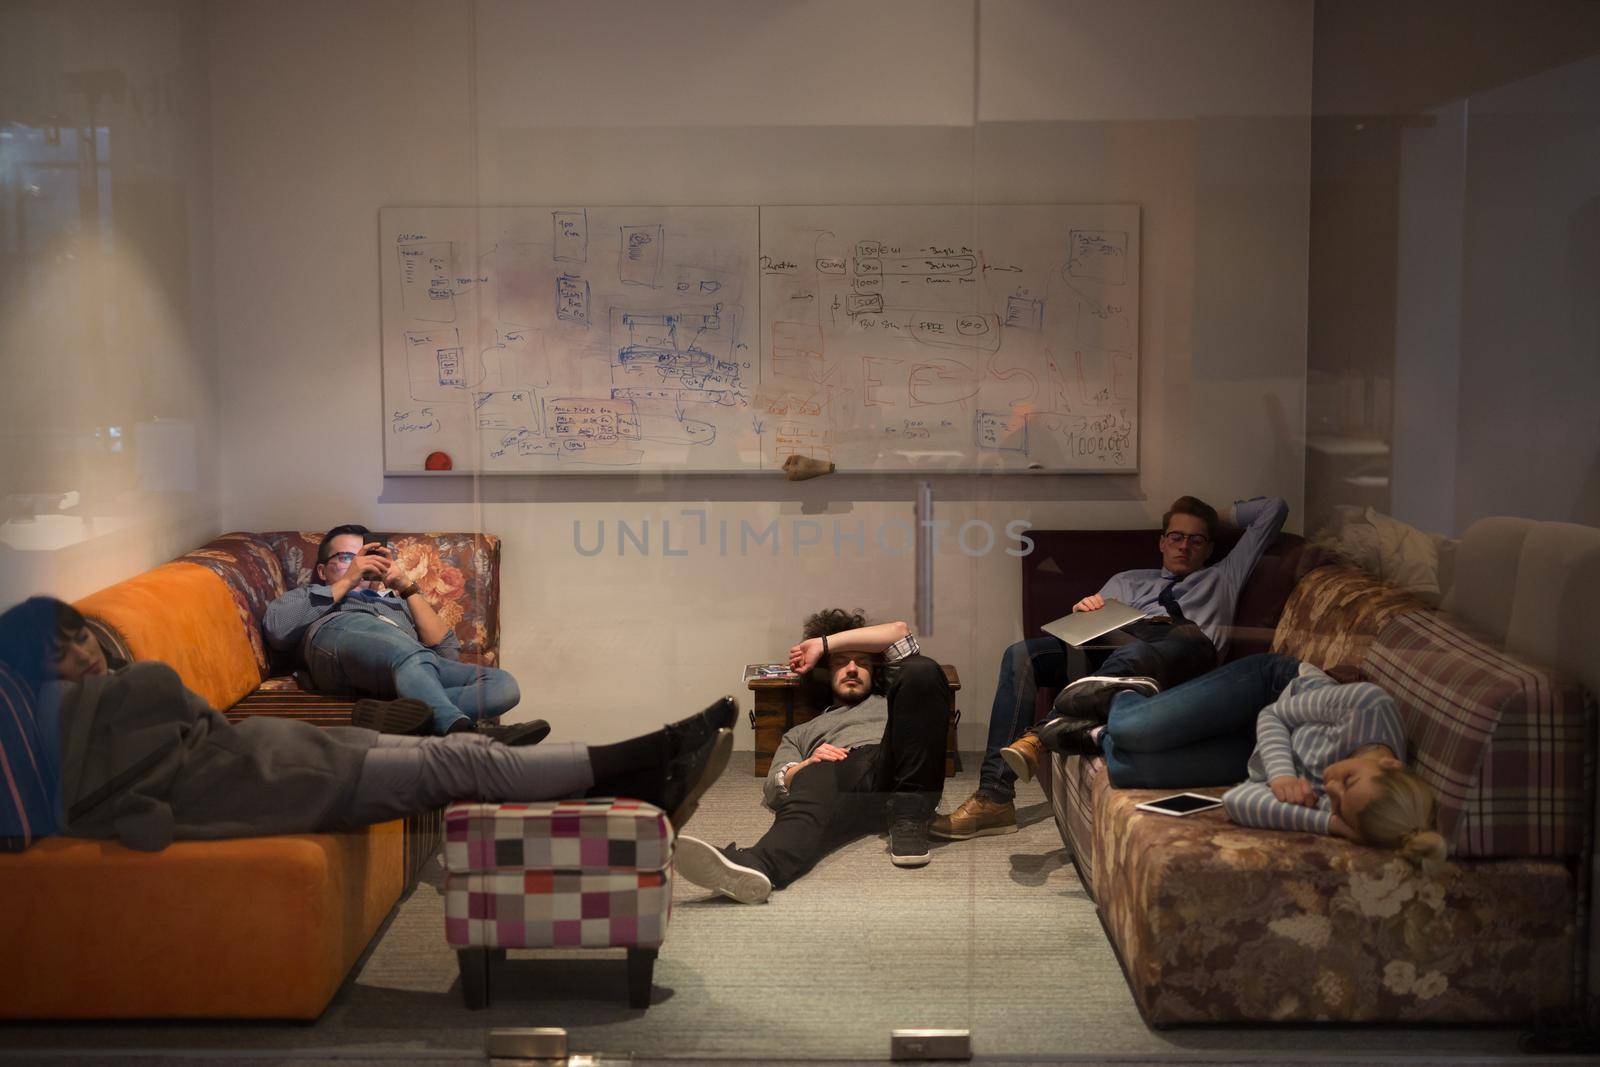 group of young casual software developer sleeping on  sofa during a work break in creative startup office